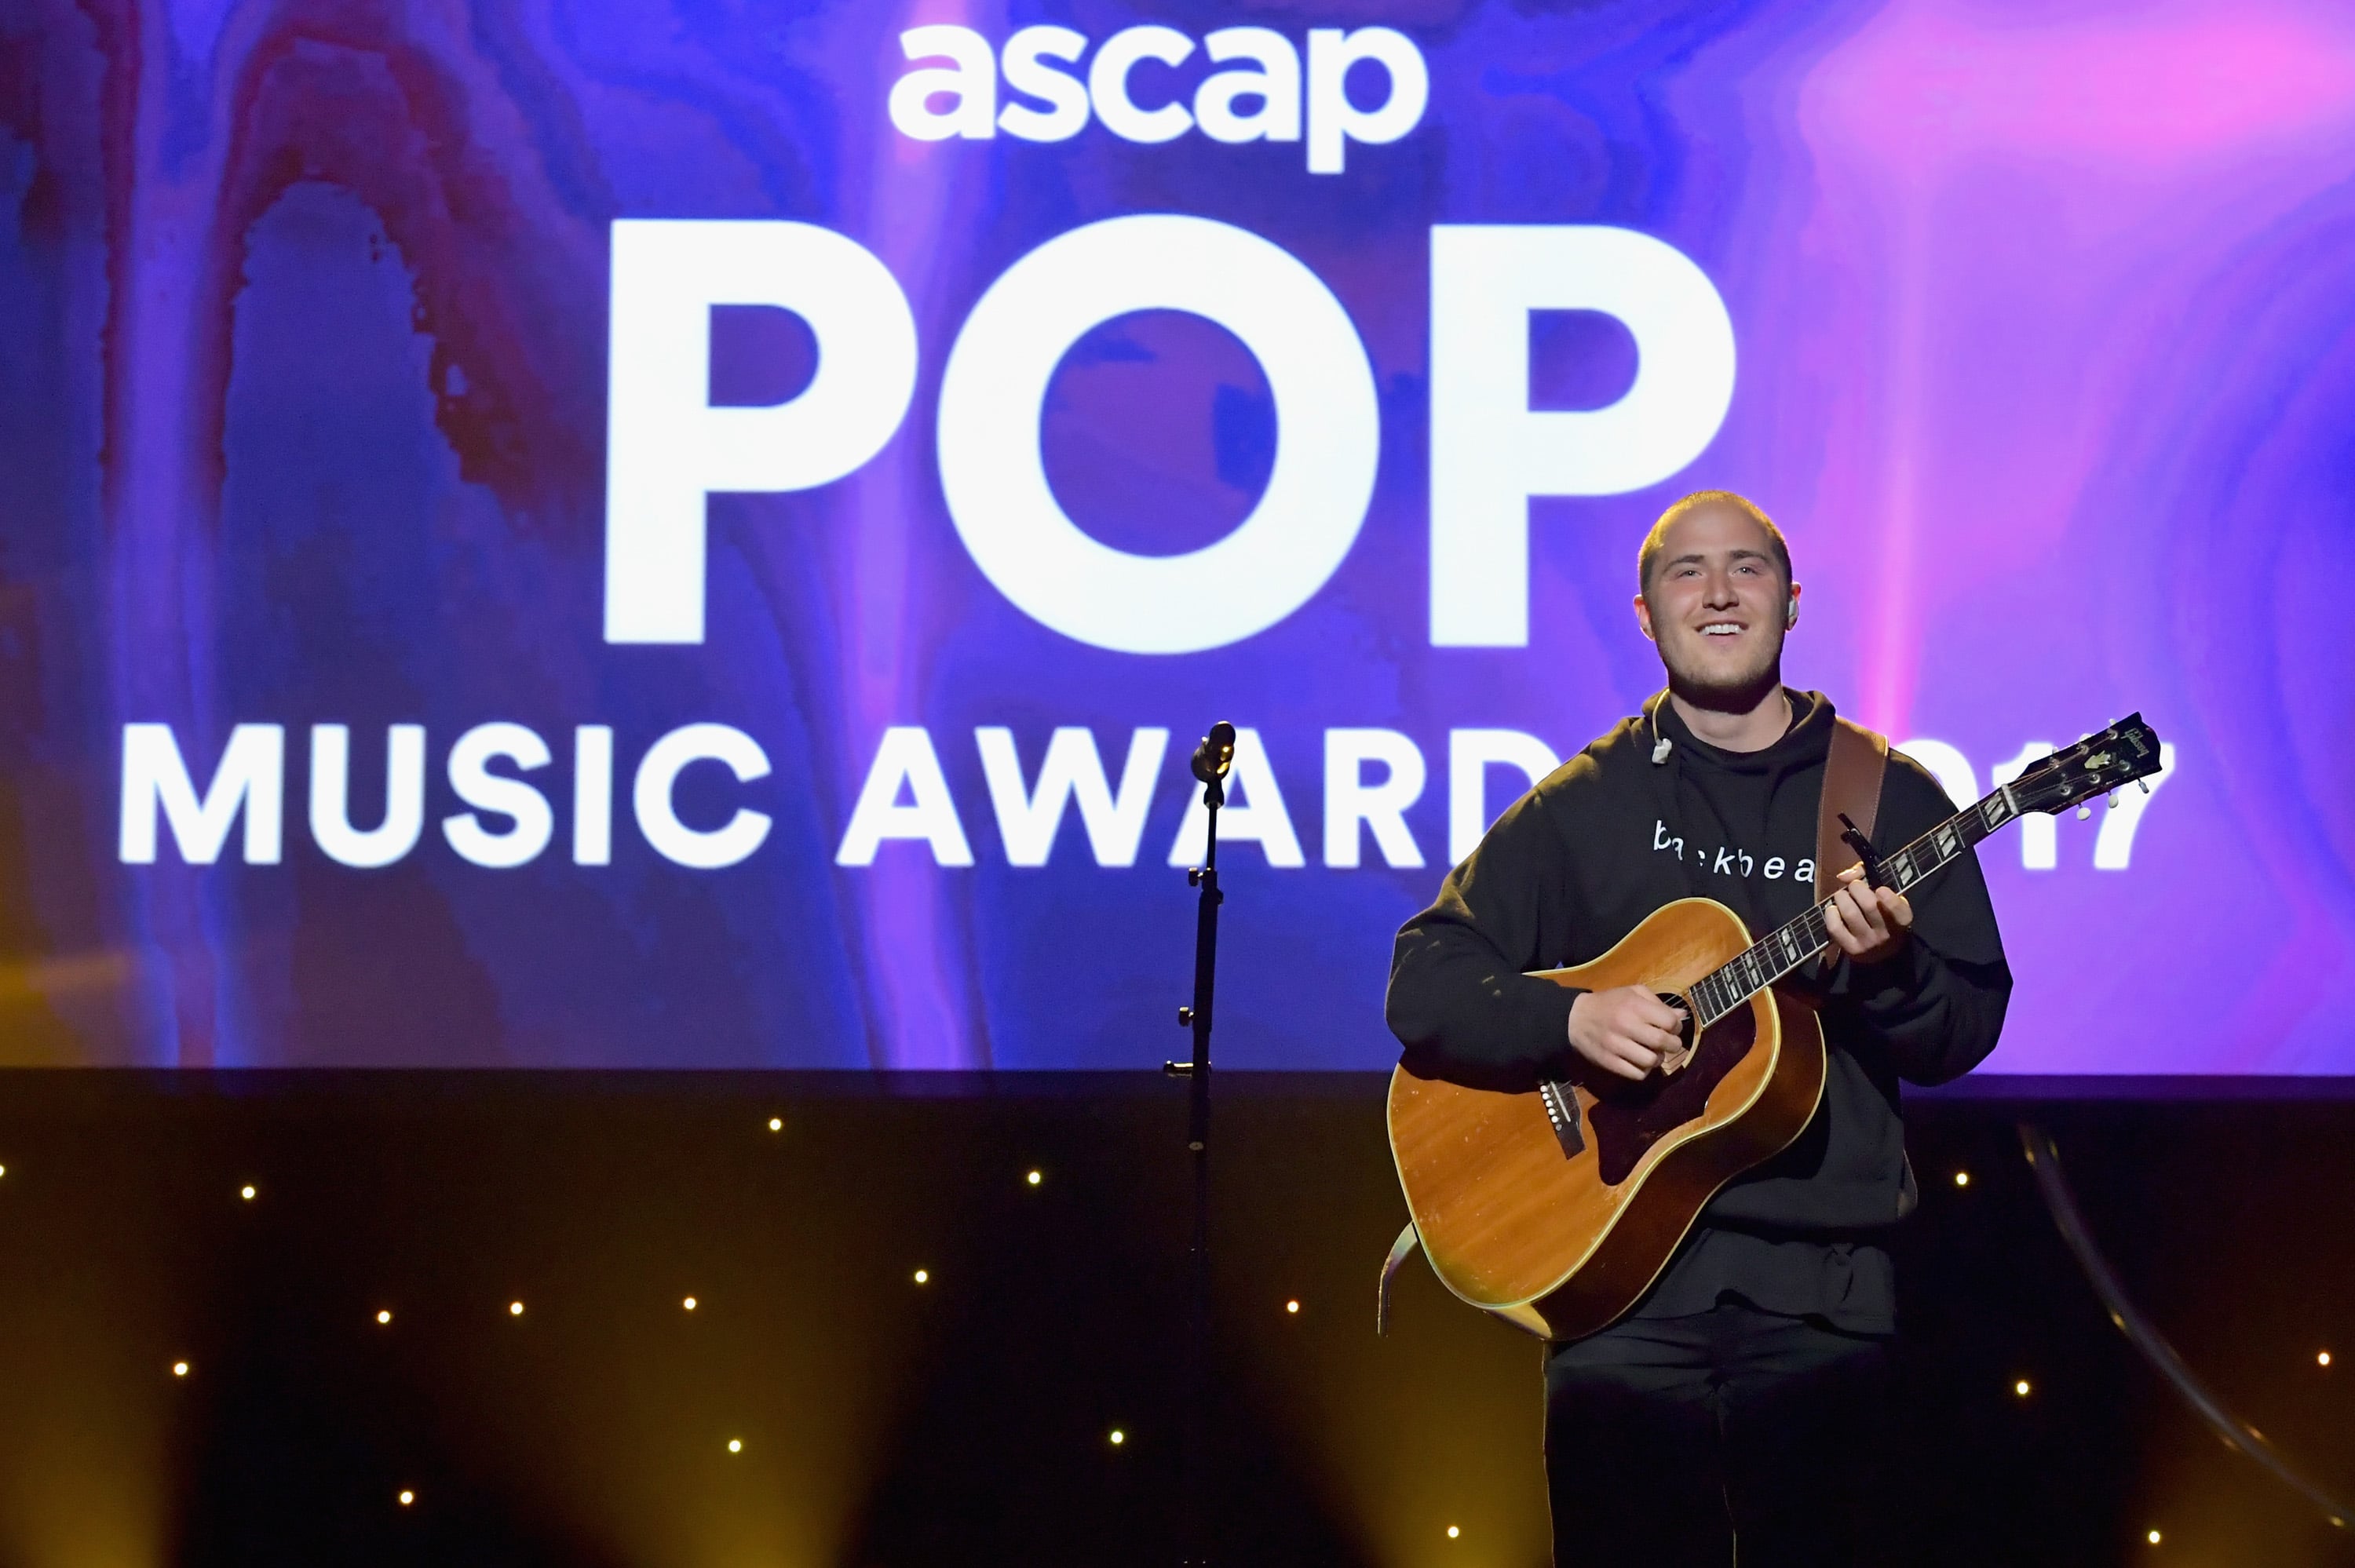 ASCAP Pop Music Awards: Max Martin wins Songwriter of the Year, Justin Bieber’s “Love Yourself” is Song of the Year